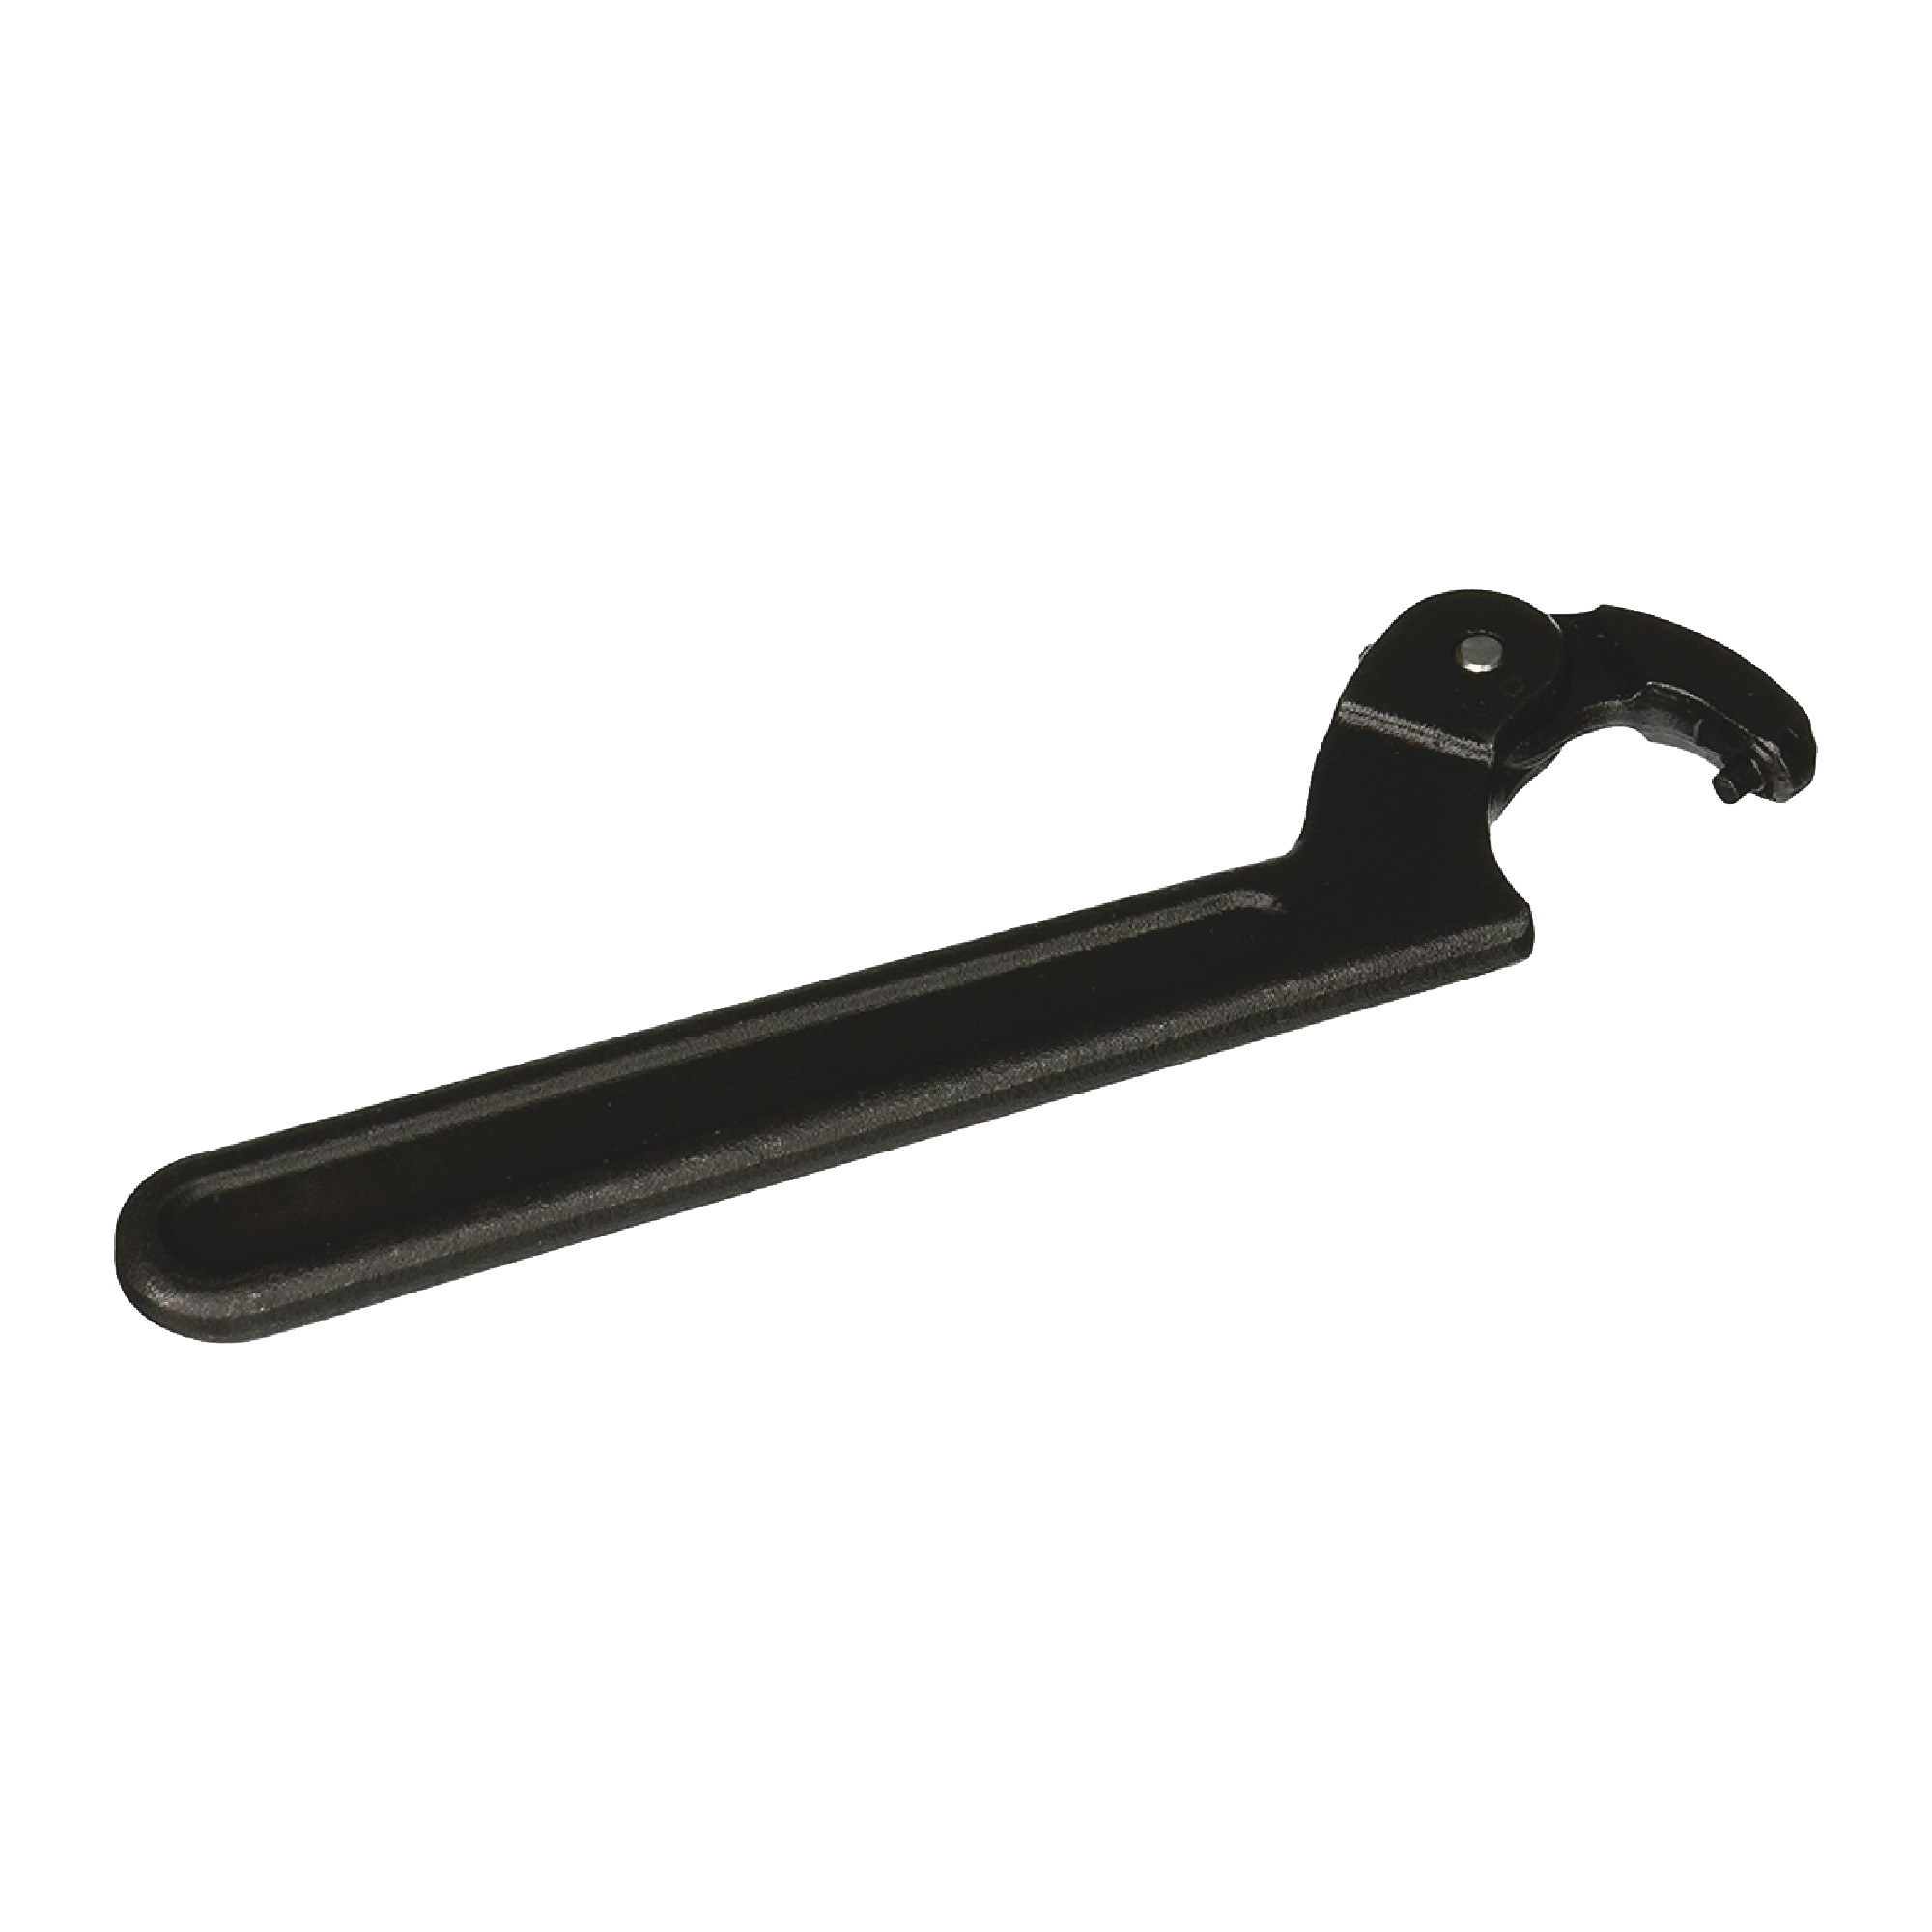 Adjustable Pin Spanner Wrench - Model: O-472A  Diameter: 1-1/4" - 3"  Overall Length: 6-7/8"